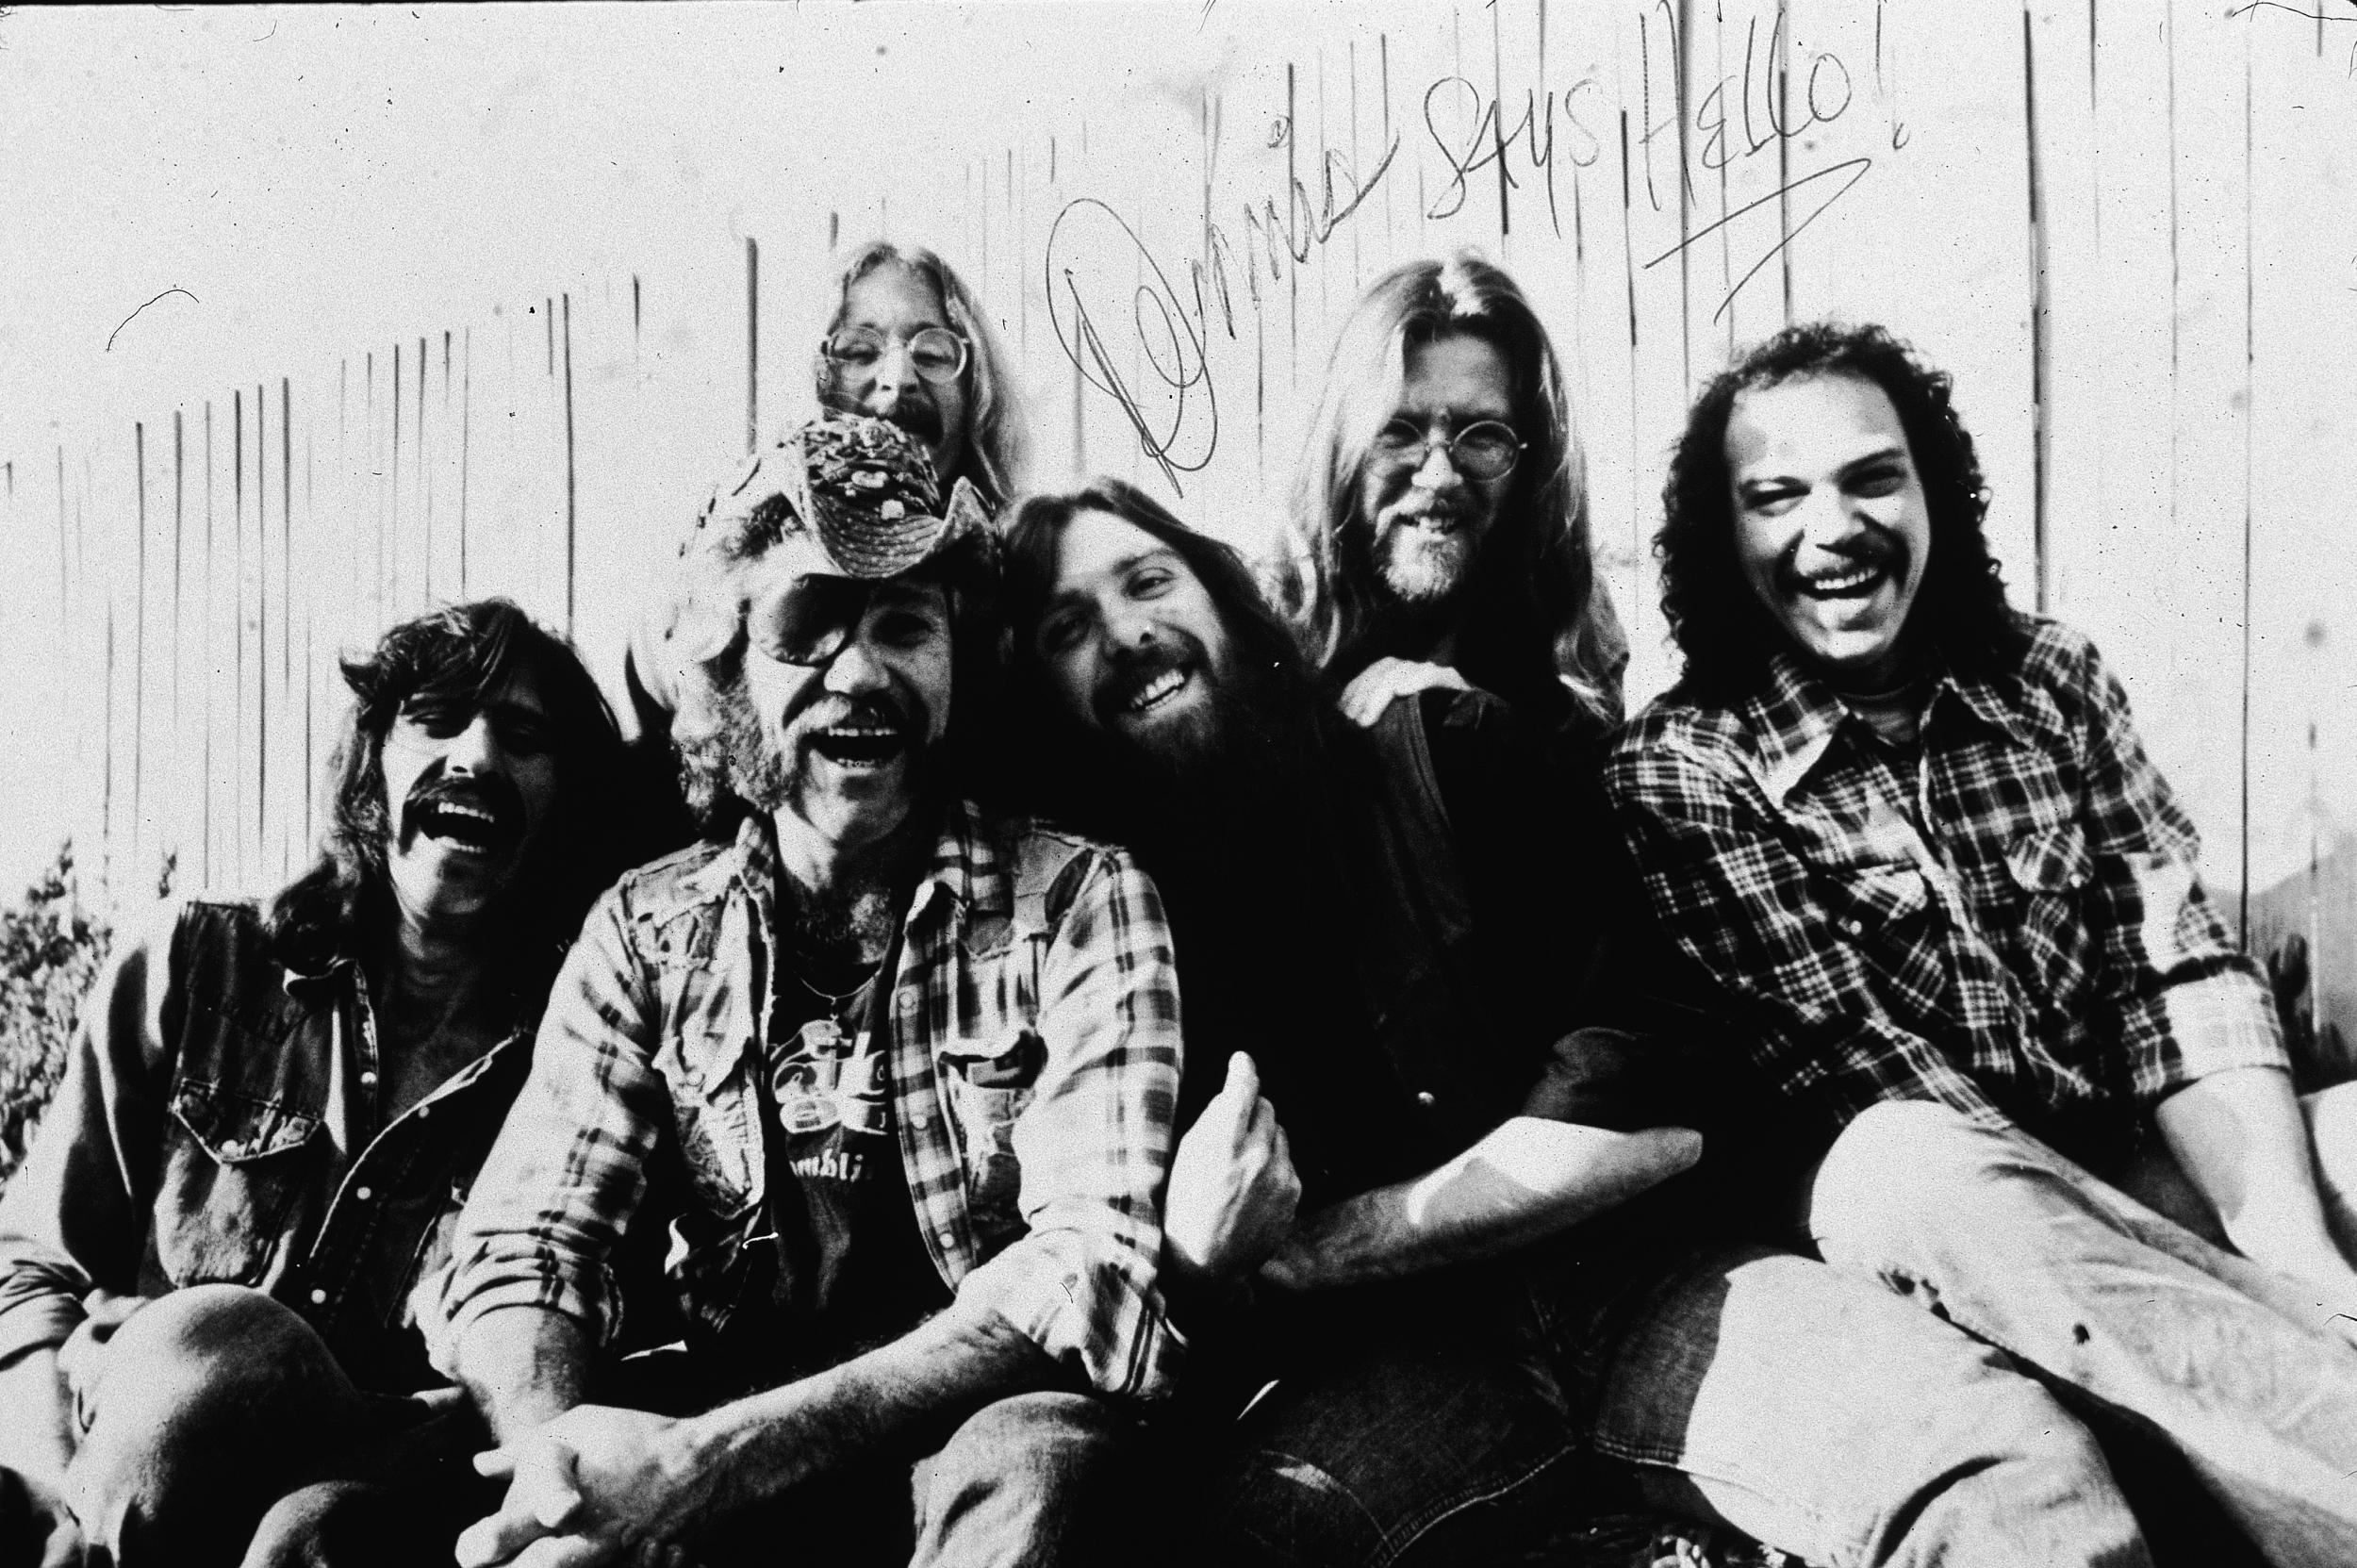 A 1979 promotional portrait of Dr Hook – (from left) Bill Francis, Ray Sawyer, Rik Elswit, Dennis Locorriere, Jance Garfat and John Walters. The picture is autographed by Locorriere and reads ‘Dennis Says Hello!’